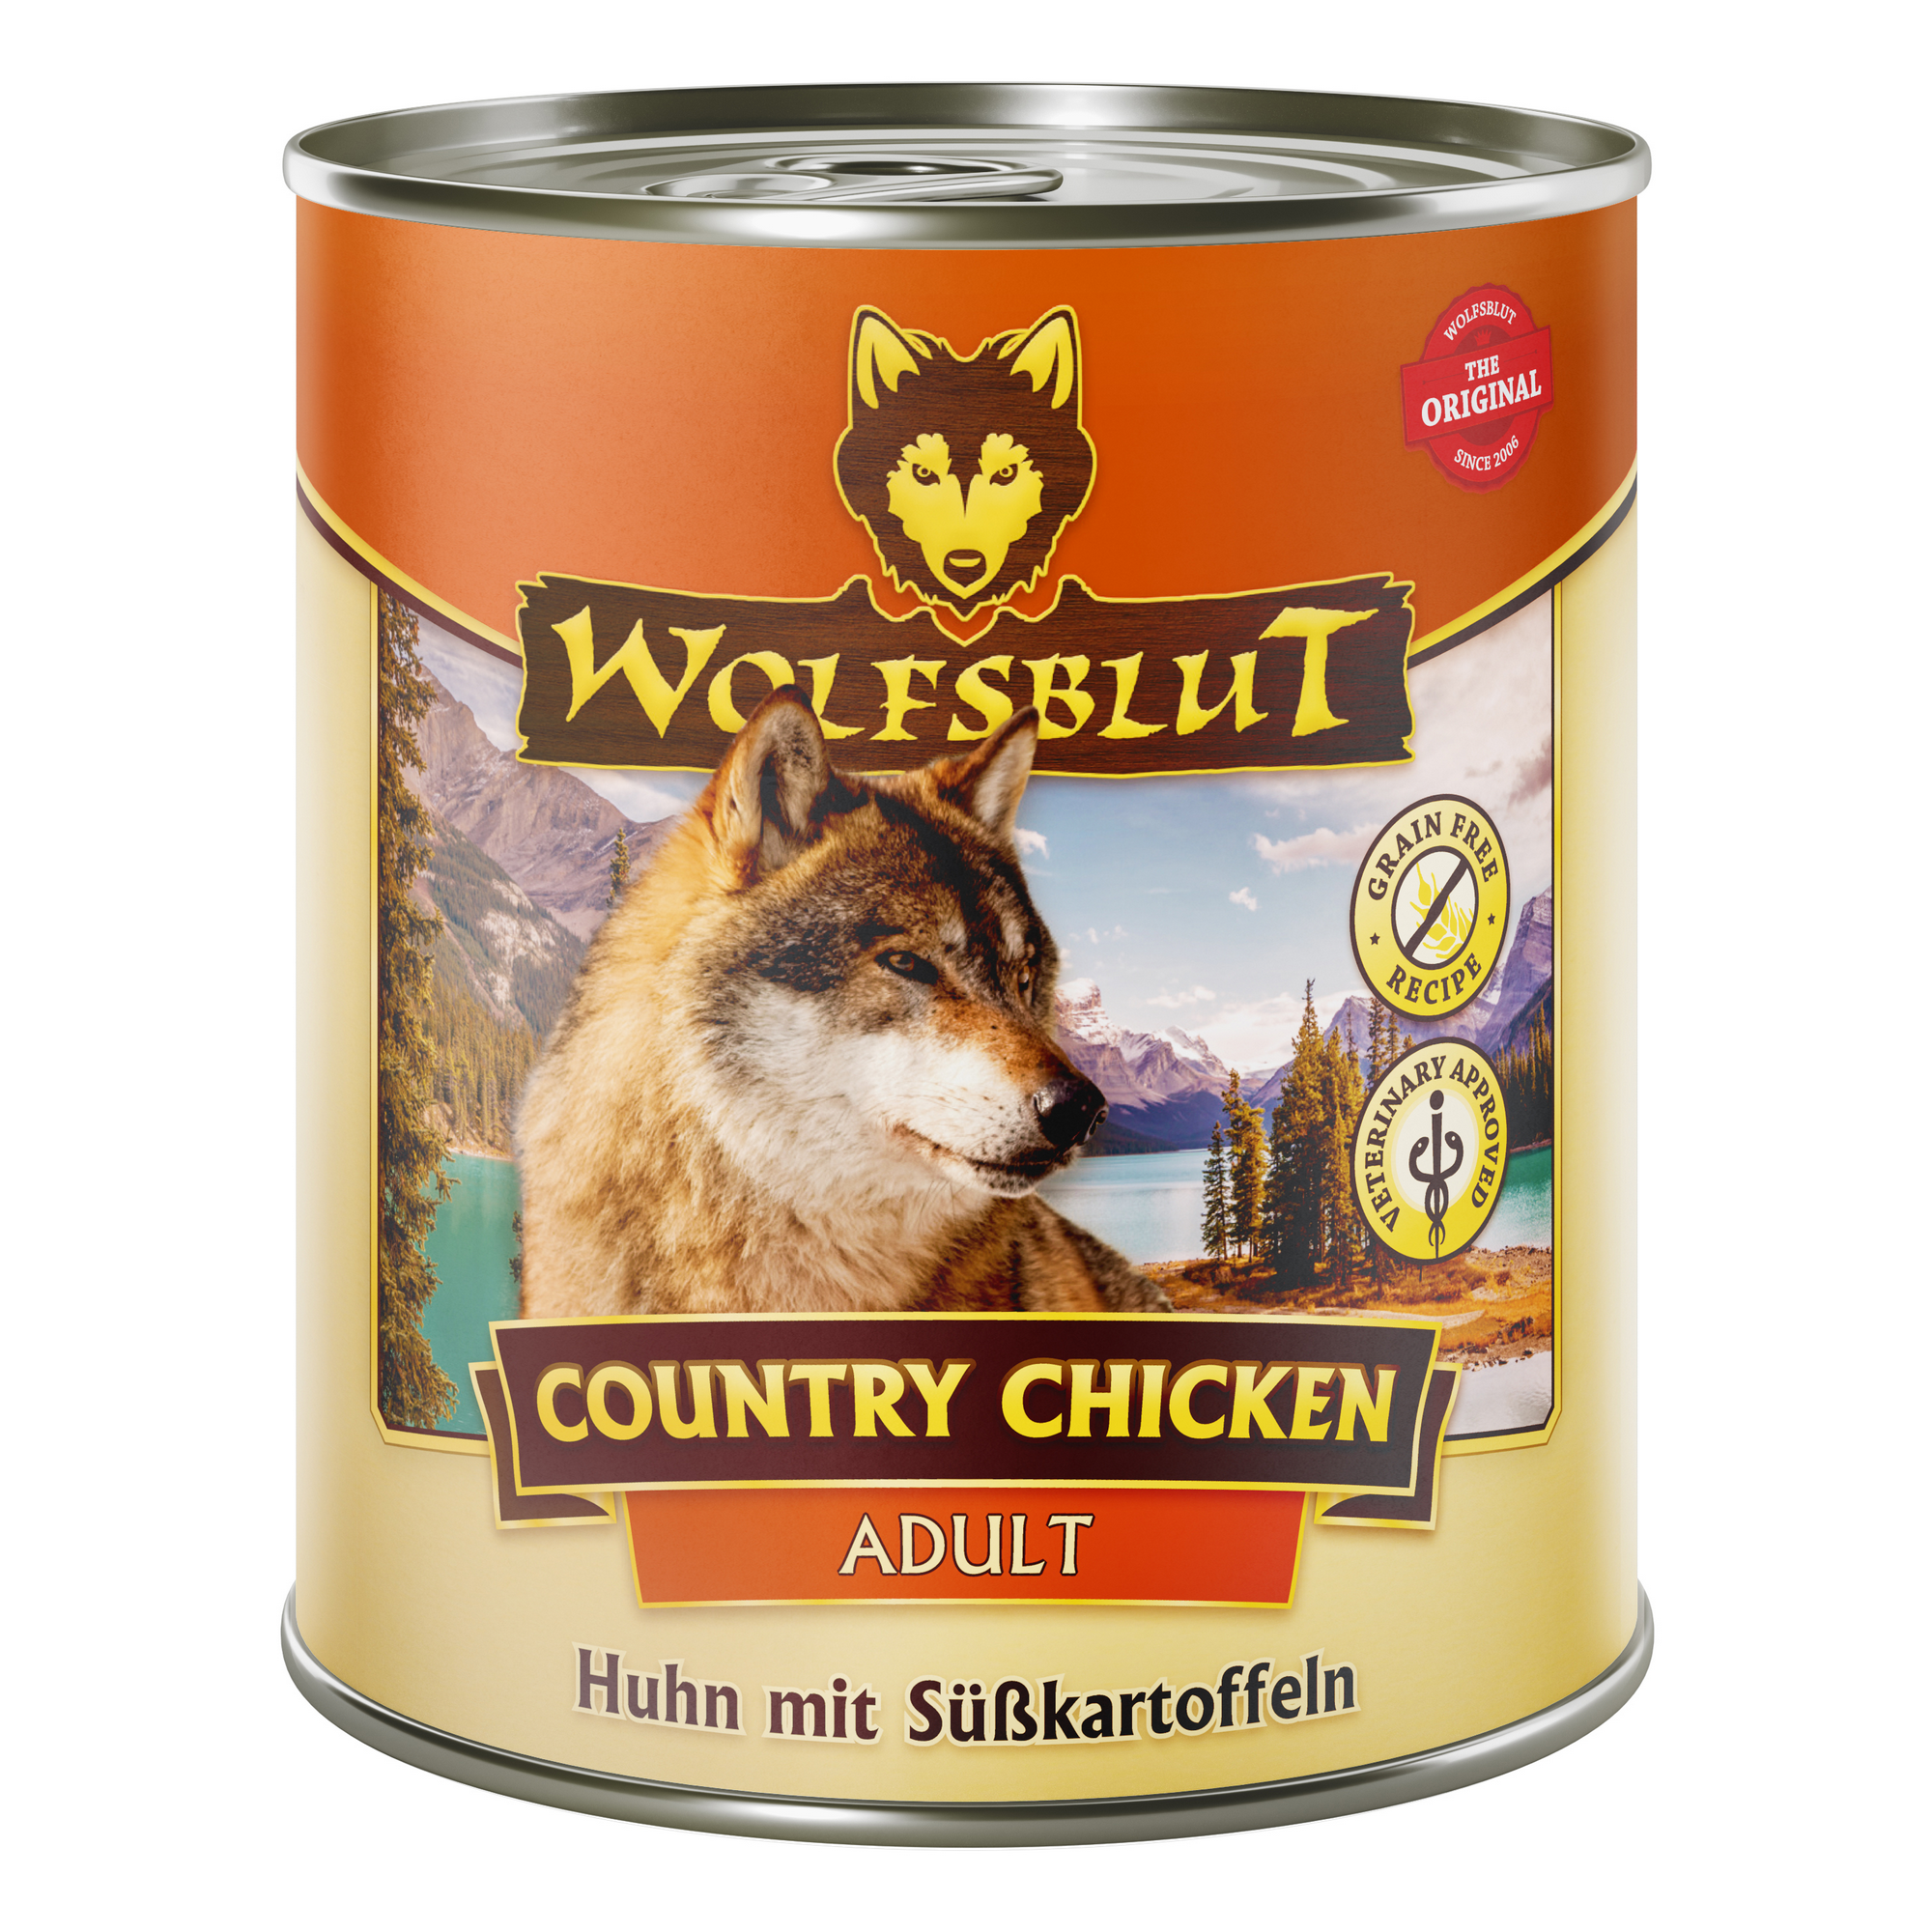 Hundenassfutter 'Country Chicken' Adult 800 g + product picture